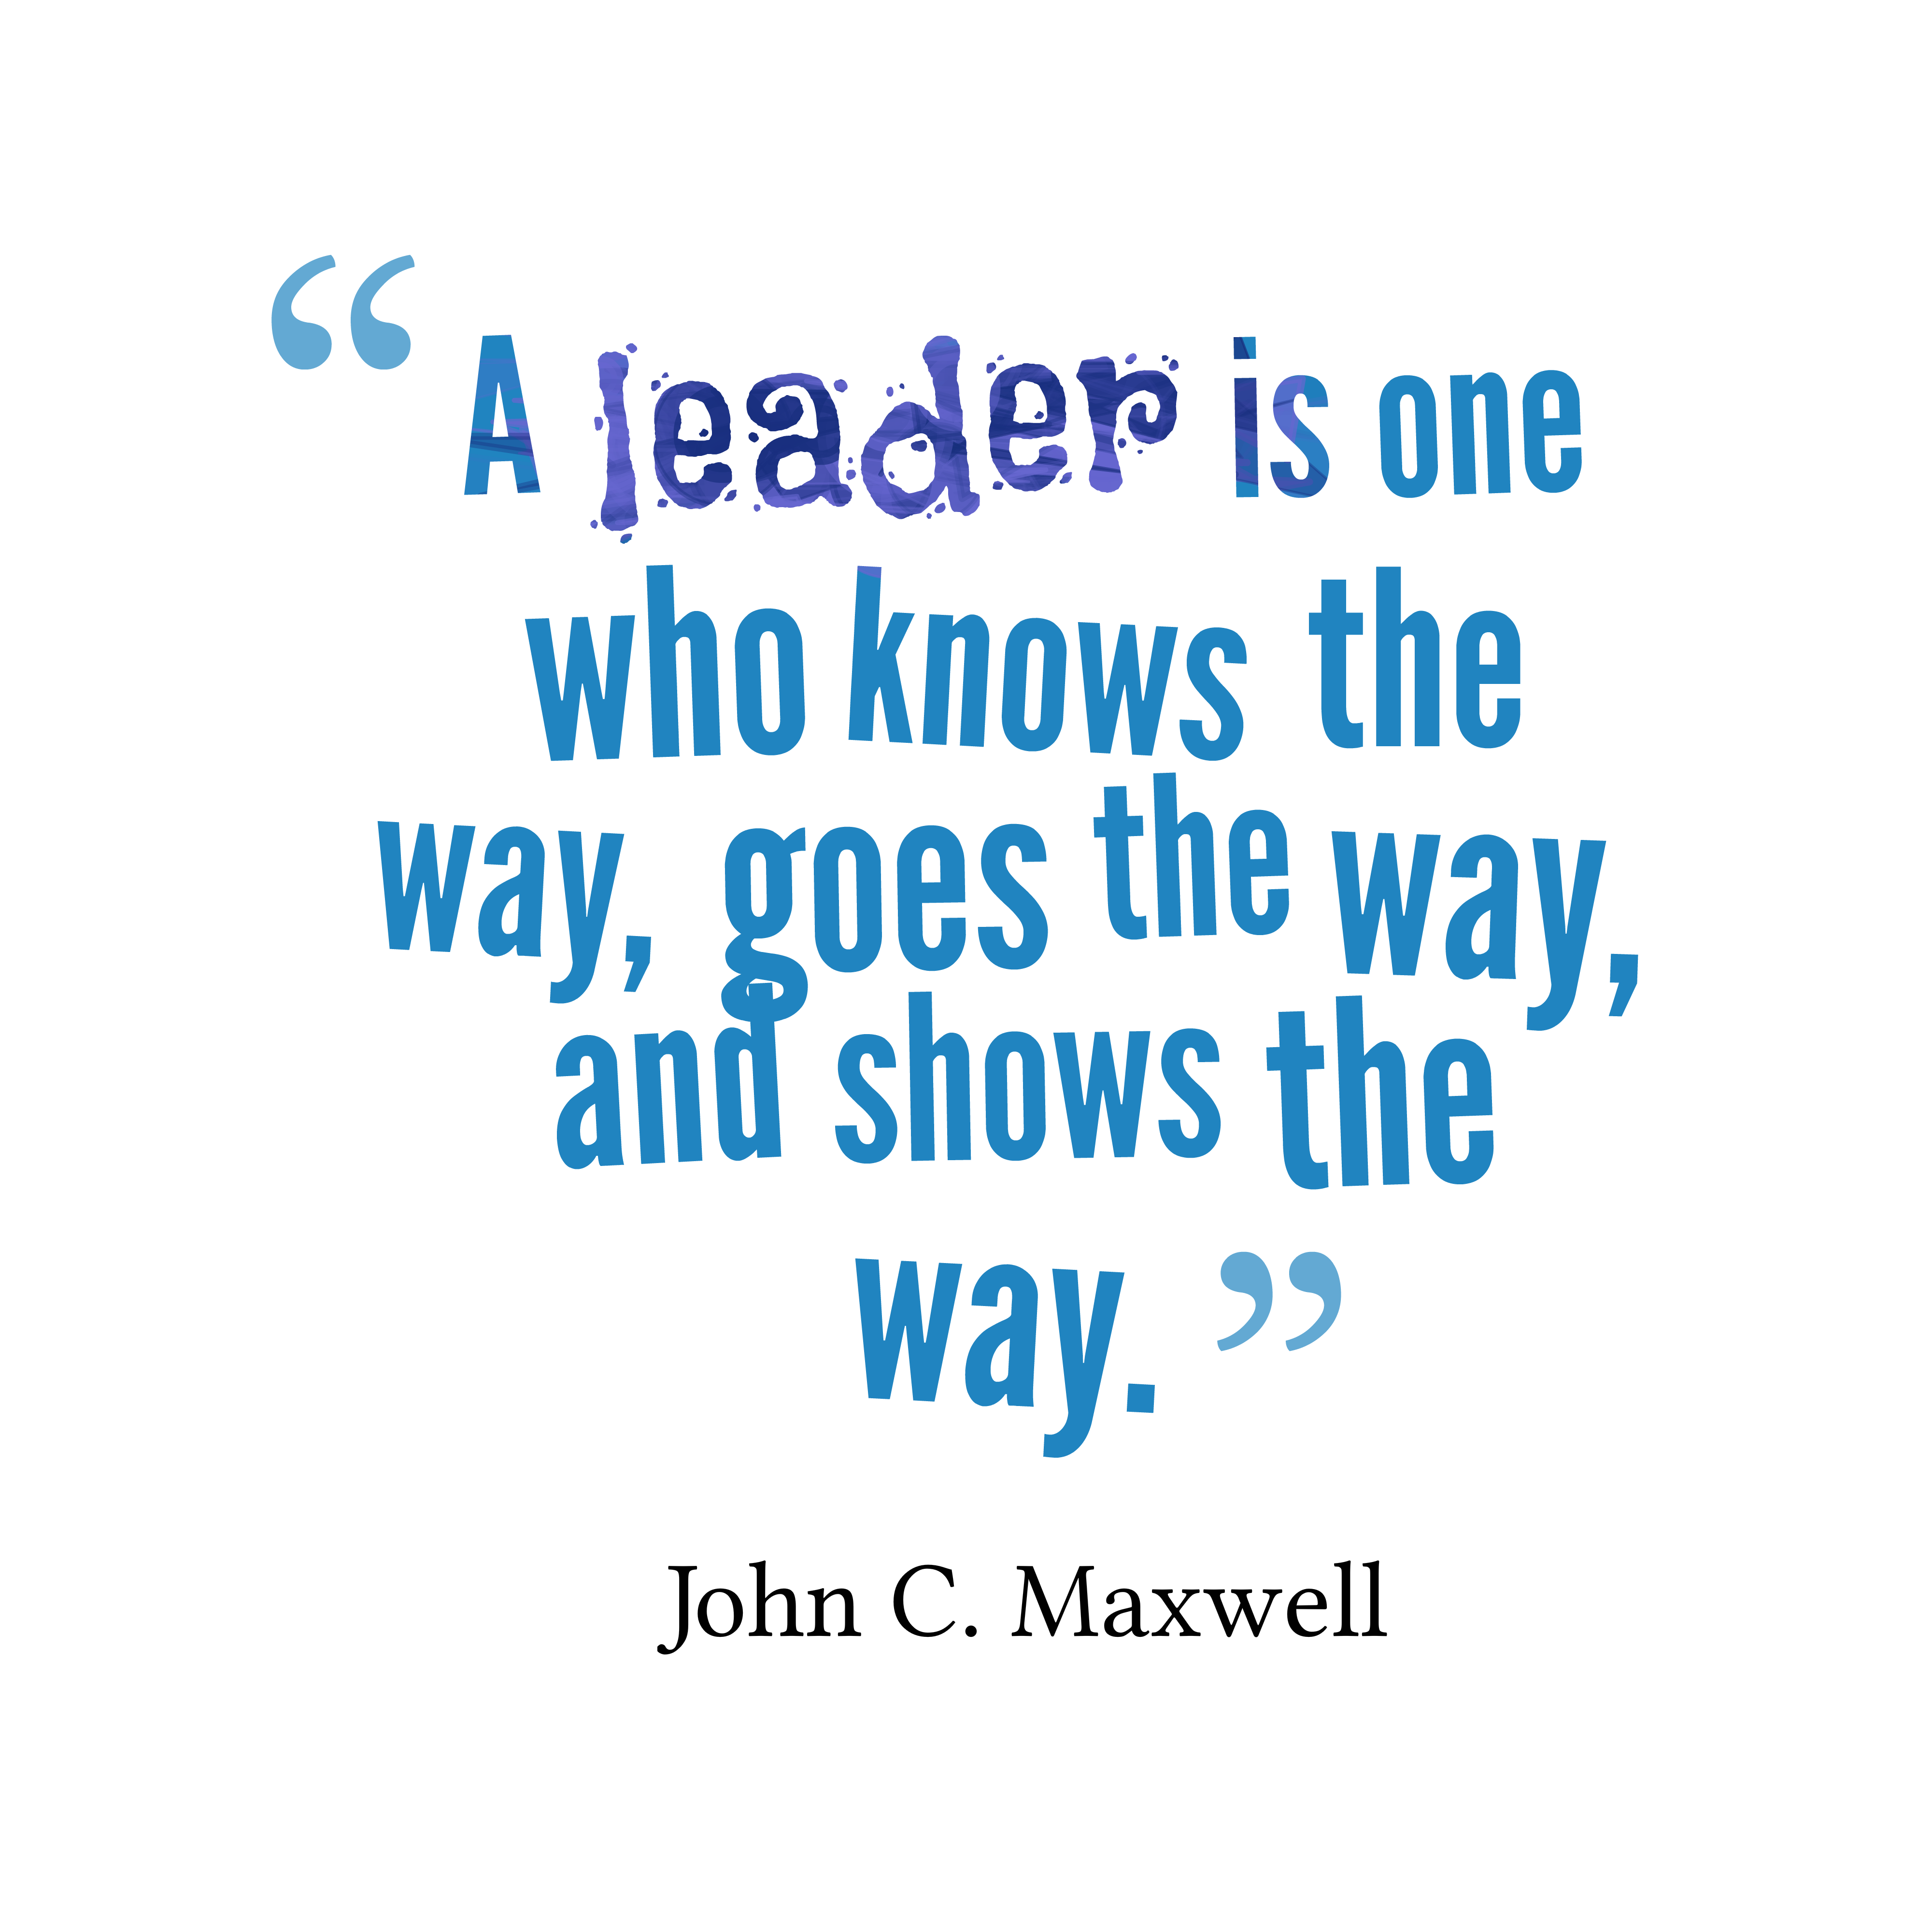 Free Quotes on Leadership